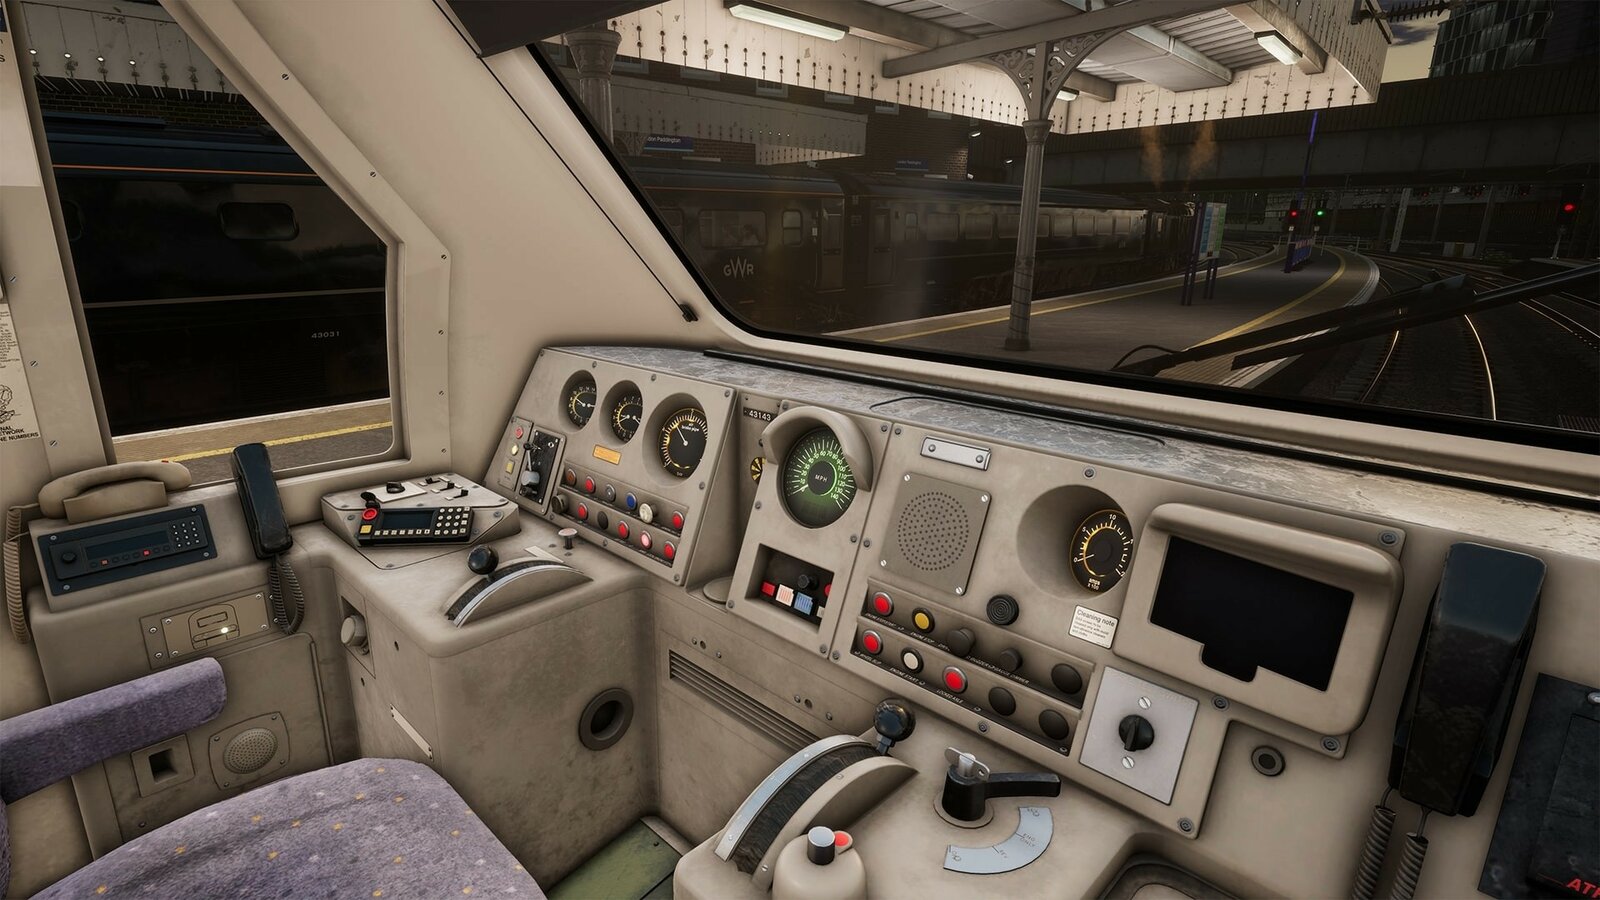 Train Sim World 2 - Great Western Express Route